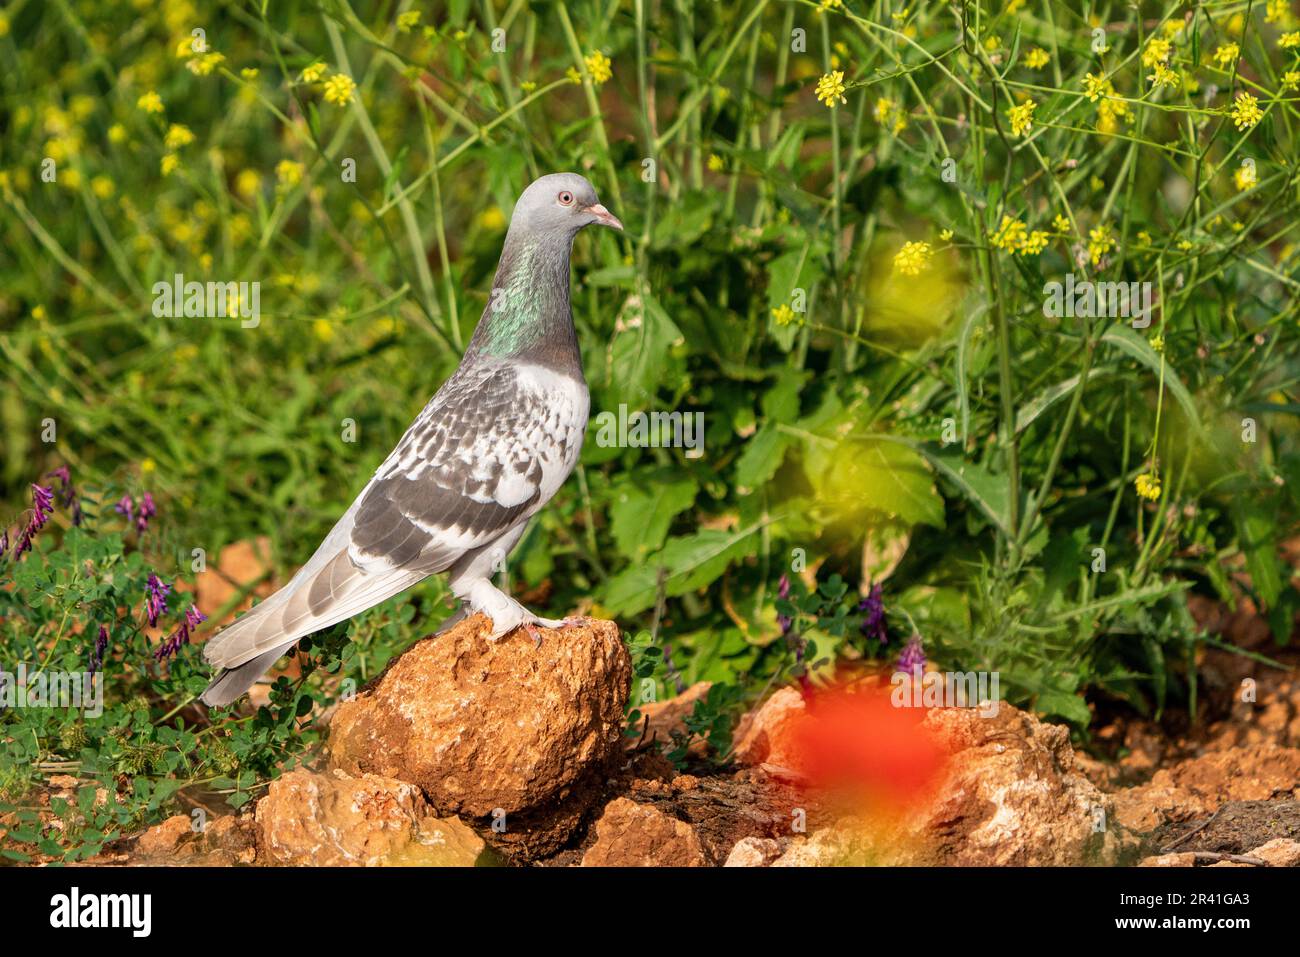 Checker feather pattern of homing speed racing pigeon Stock Photo